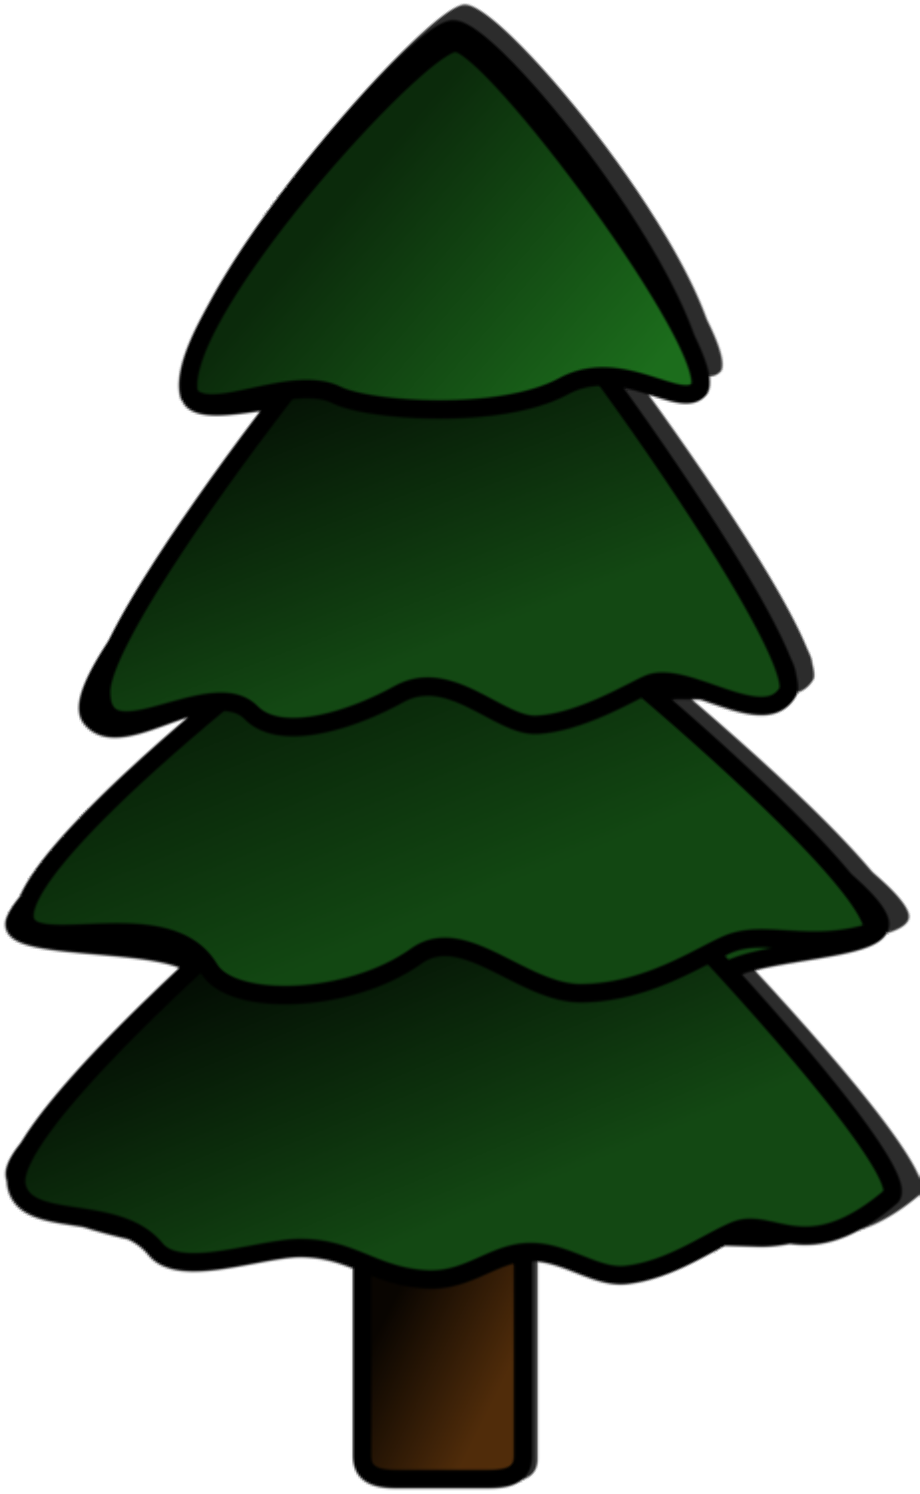 Download High Quality Tree clipart evergreen Transparent PNG Images